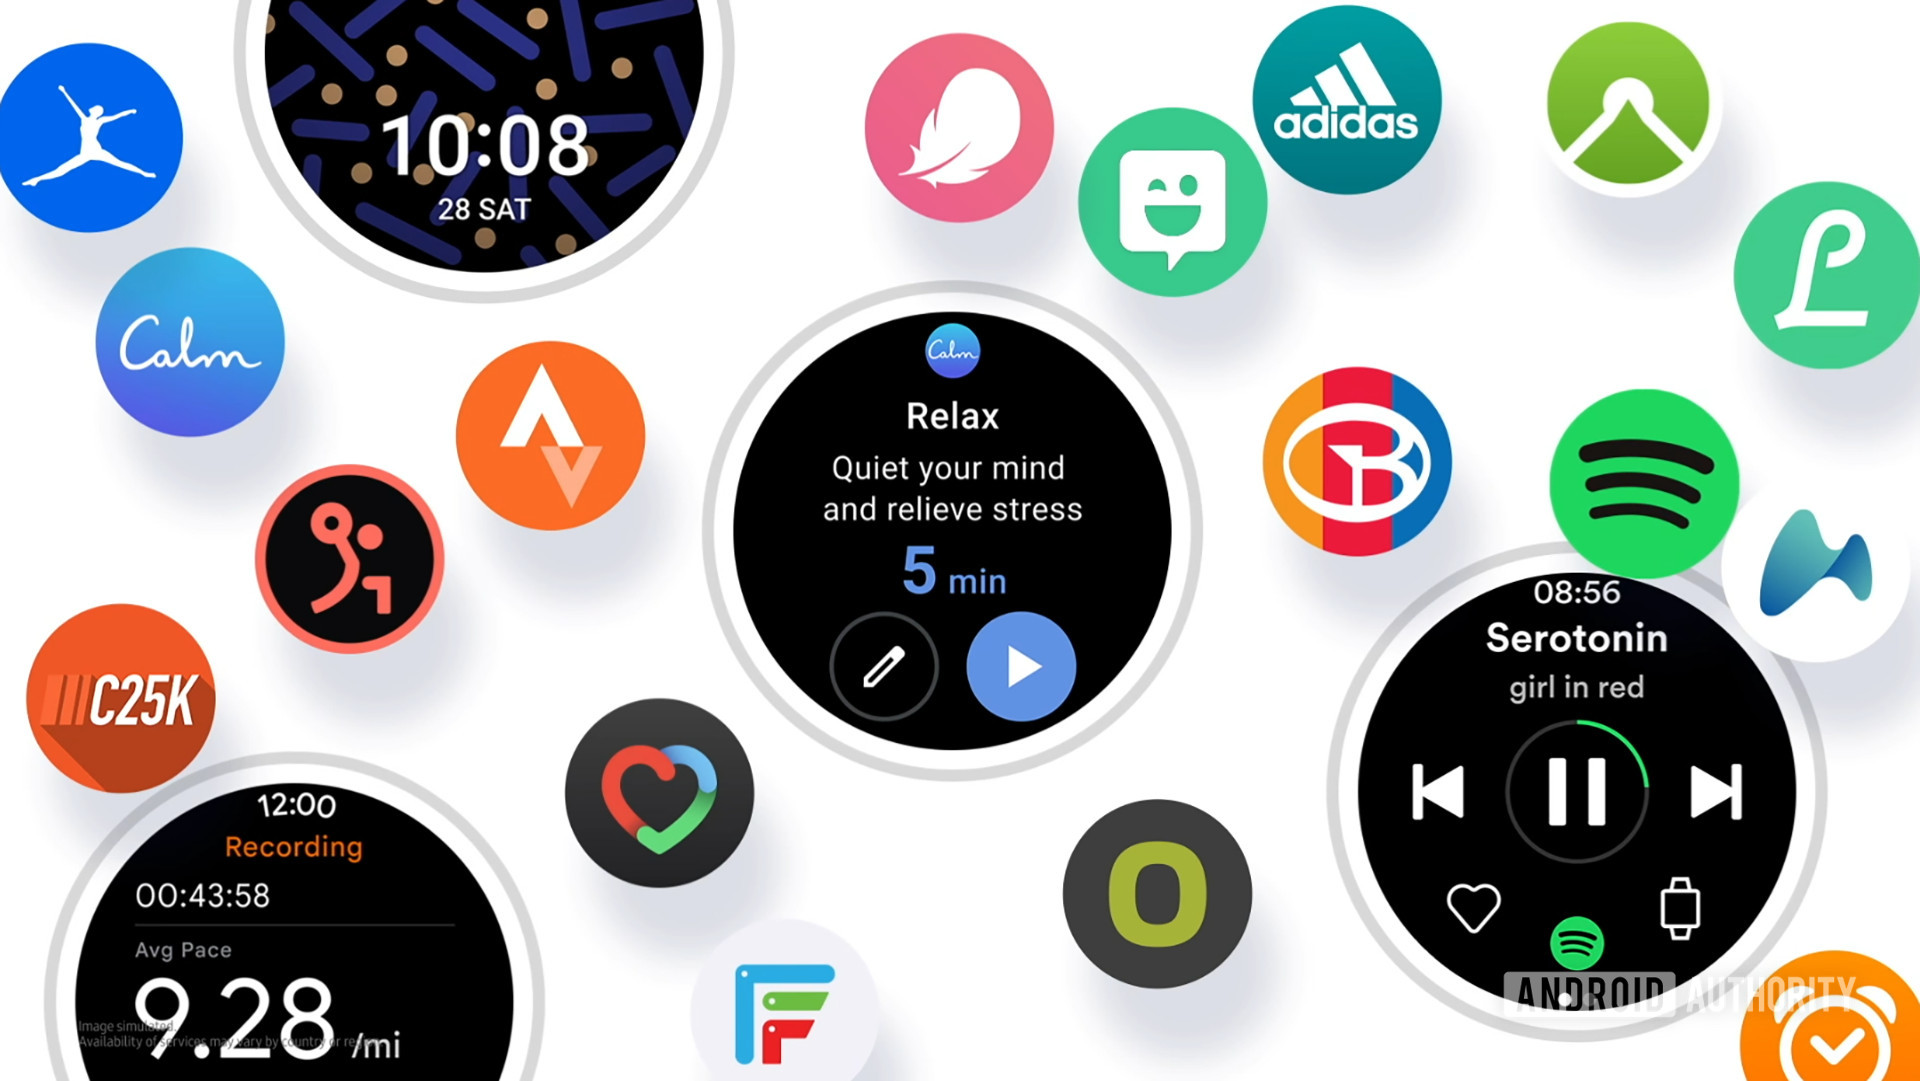 MWC 2021: Samsung Presents New Watch Experience with a Sneak Peek of One UI Watch